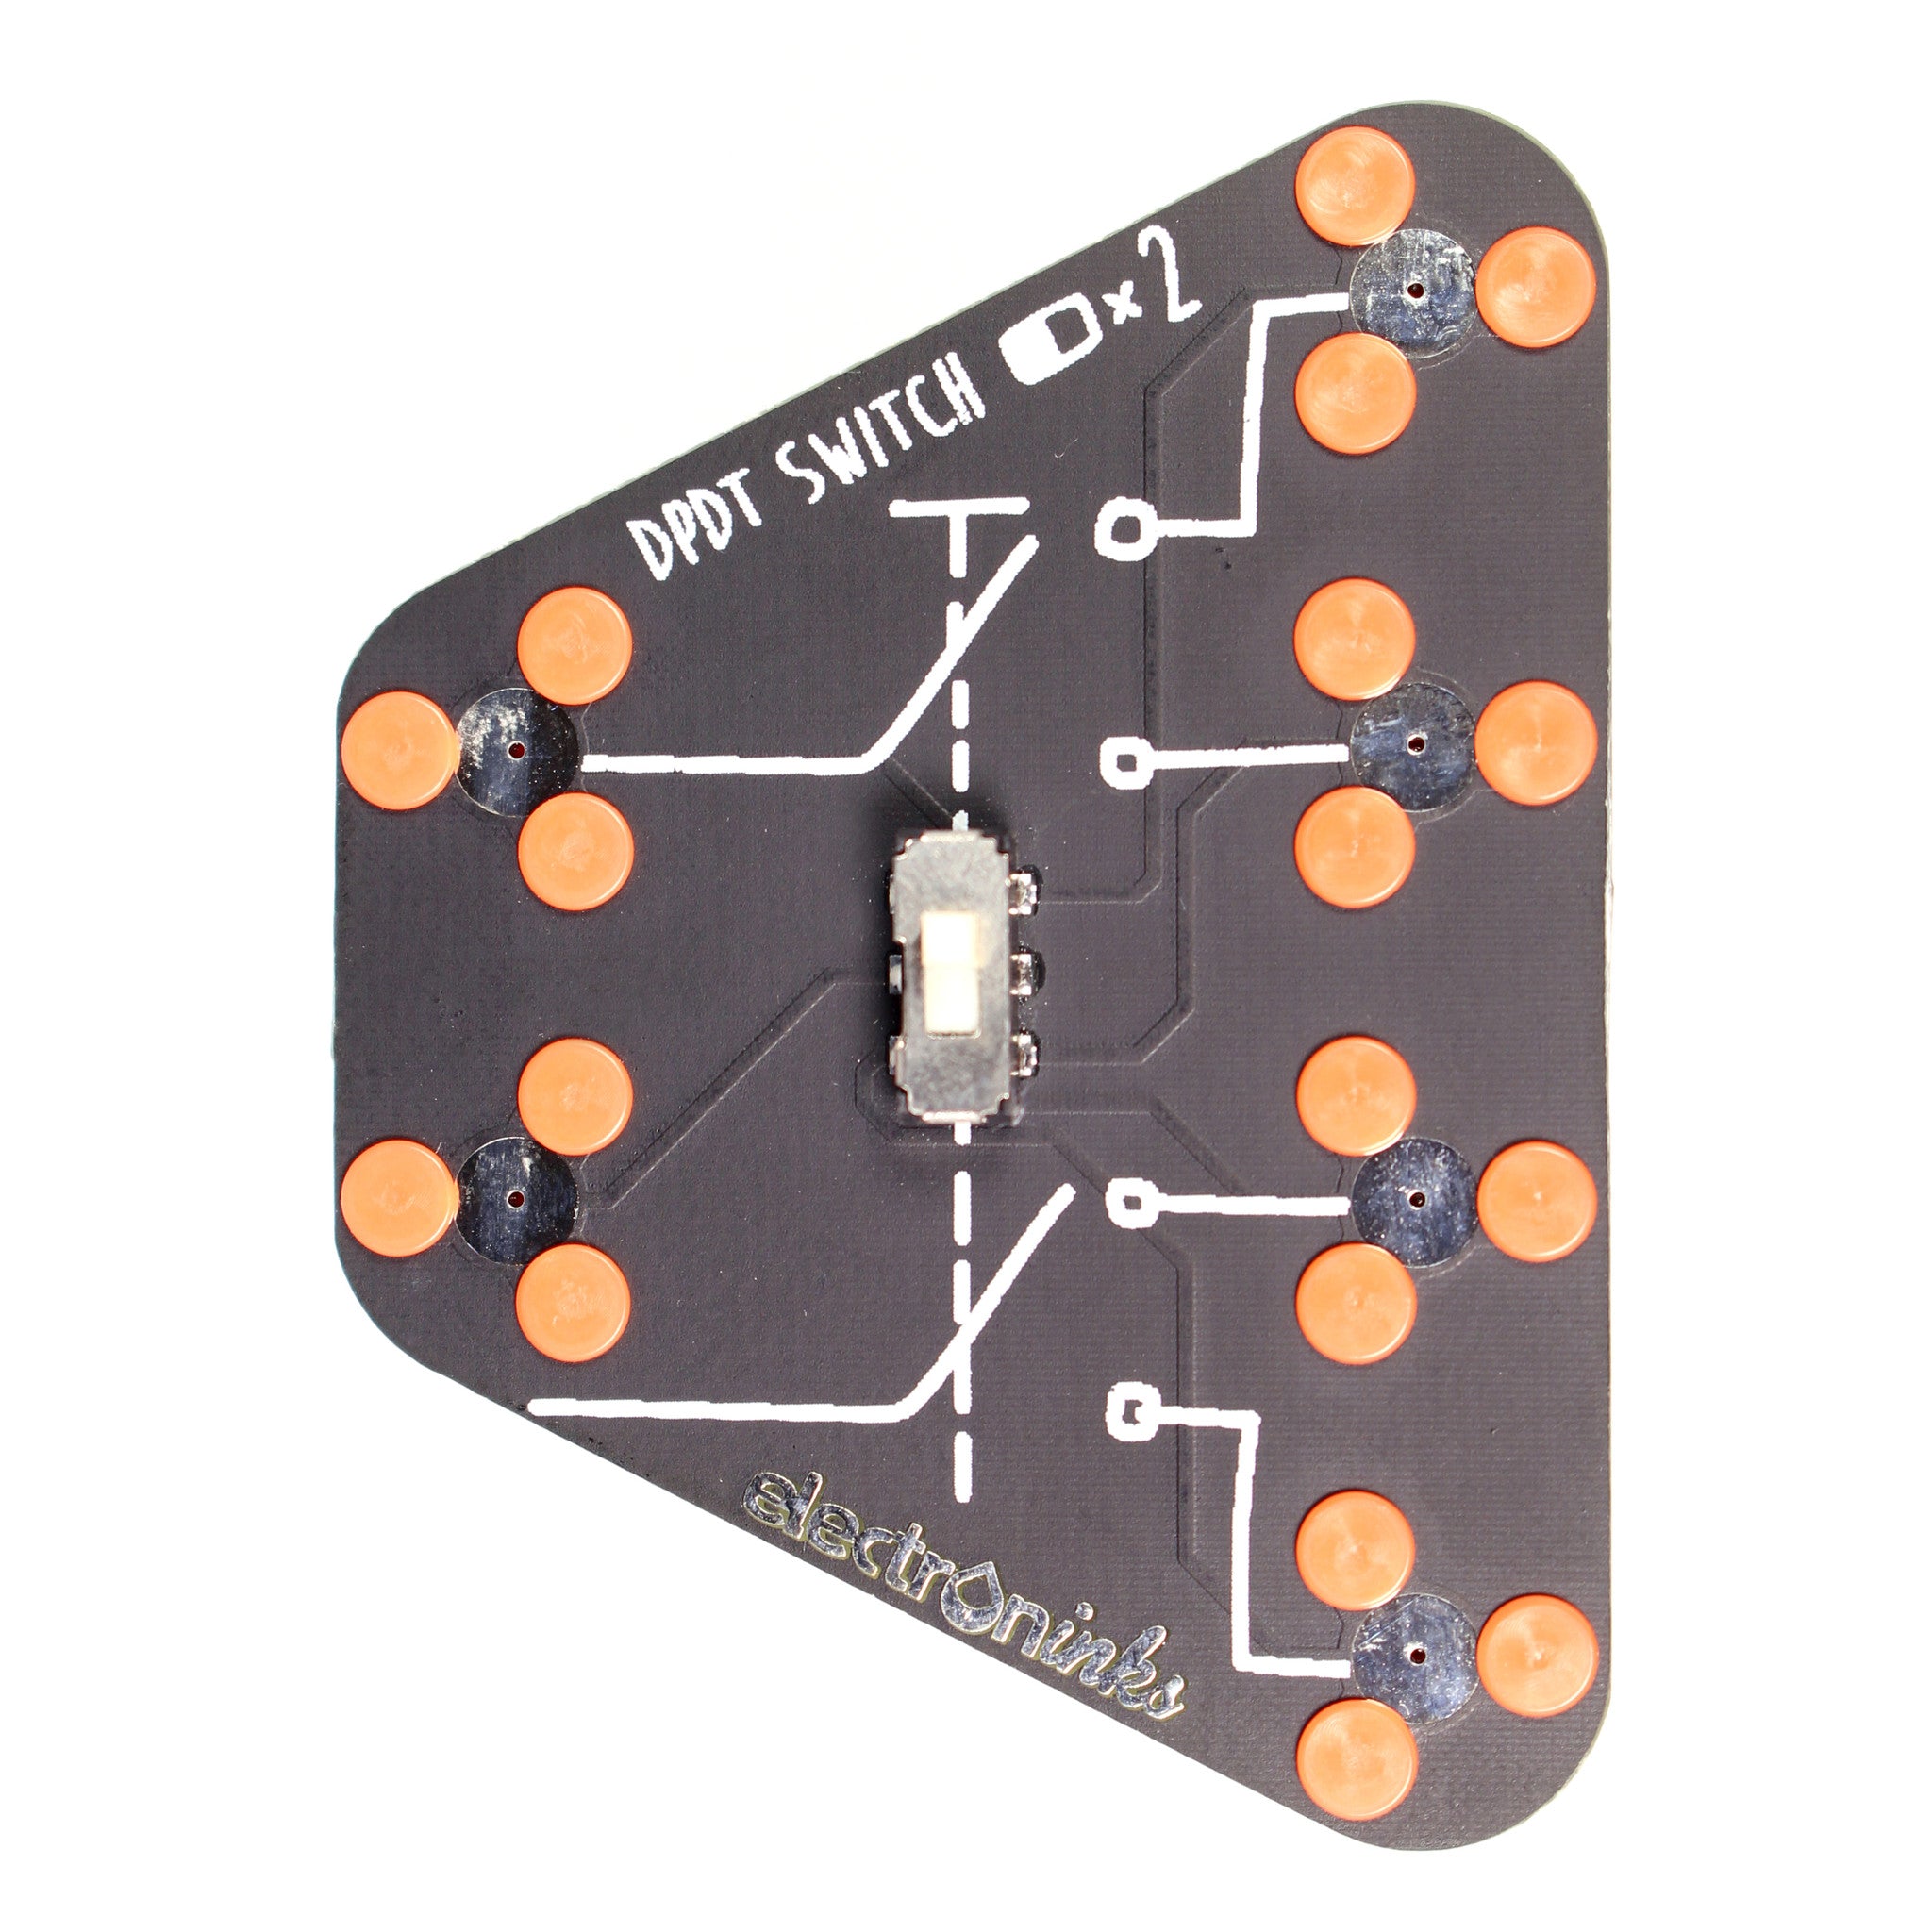 A Circuit Scribe DPDT Switch module on a white background.